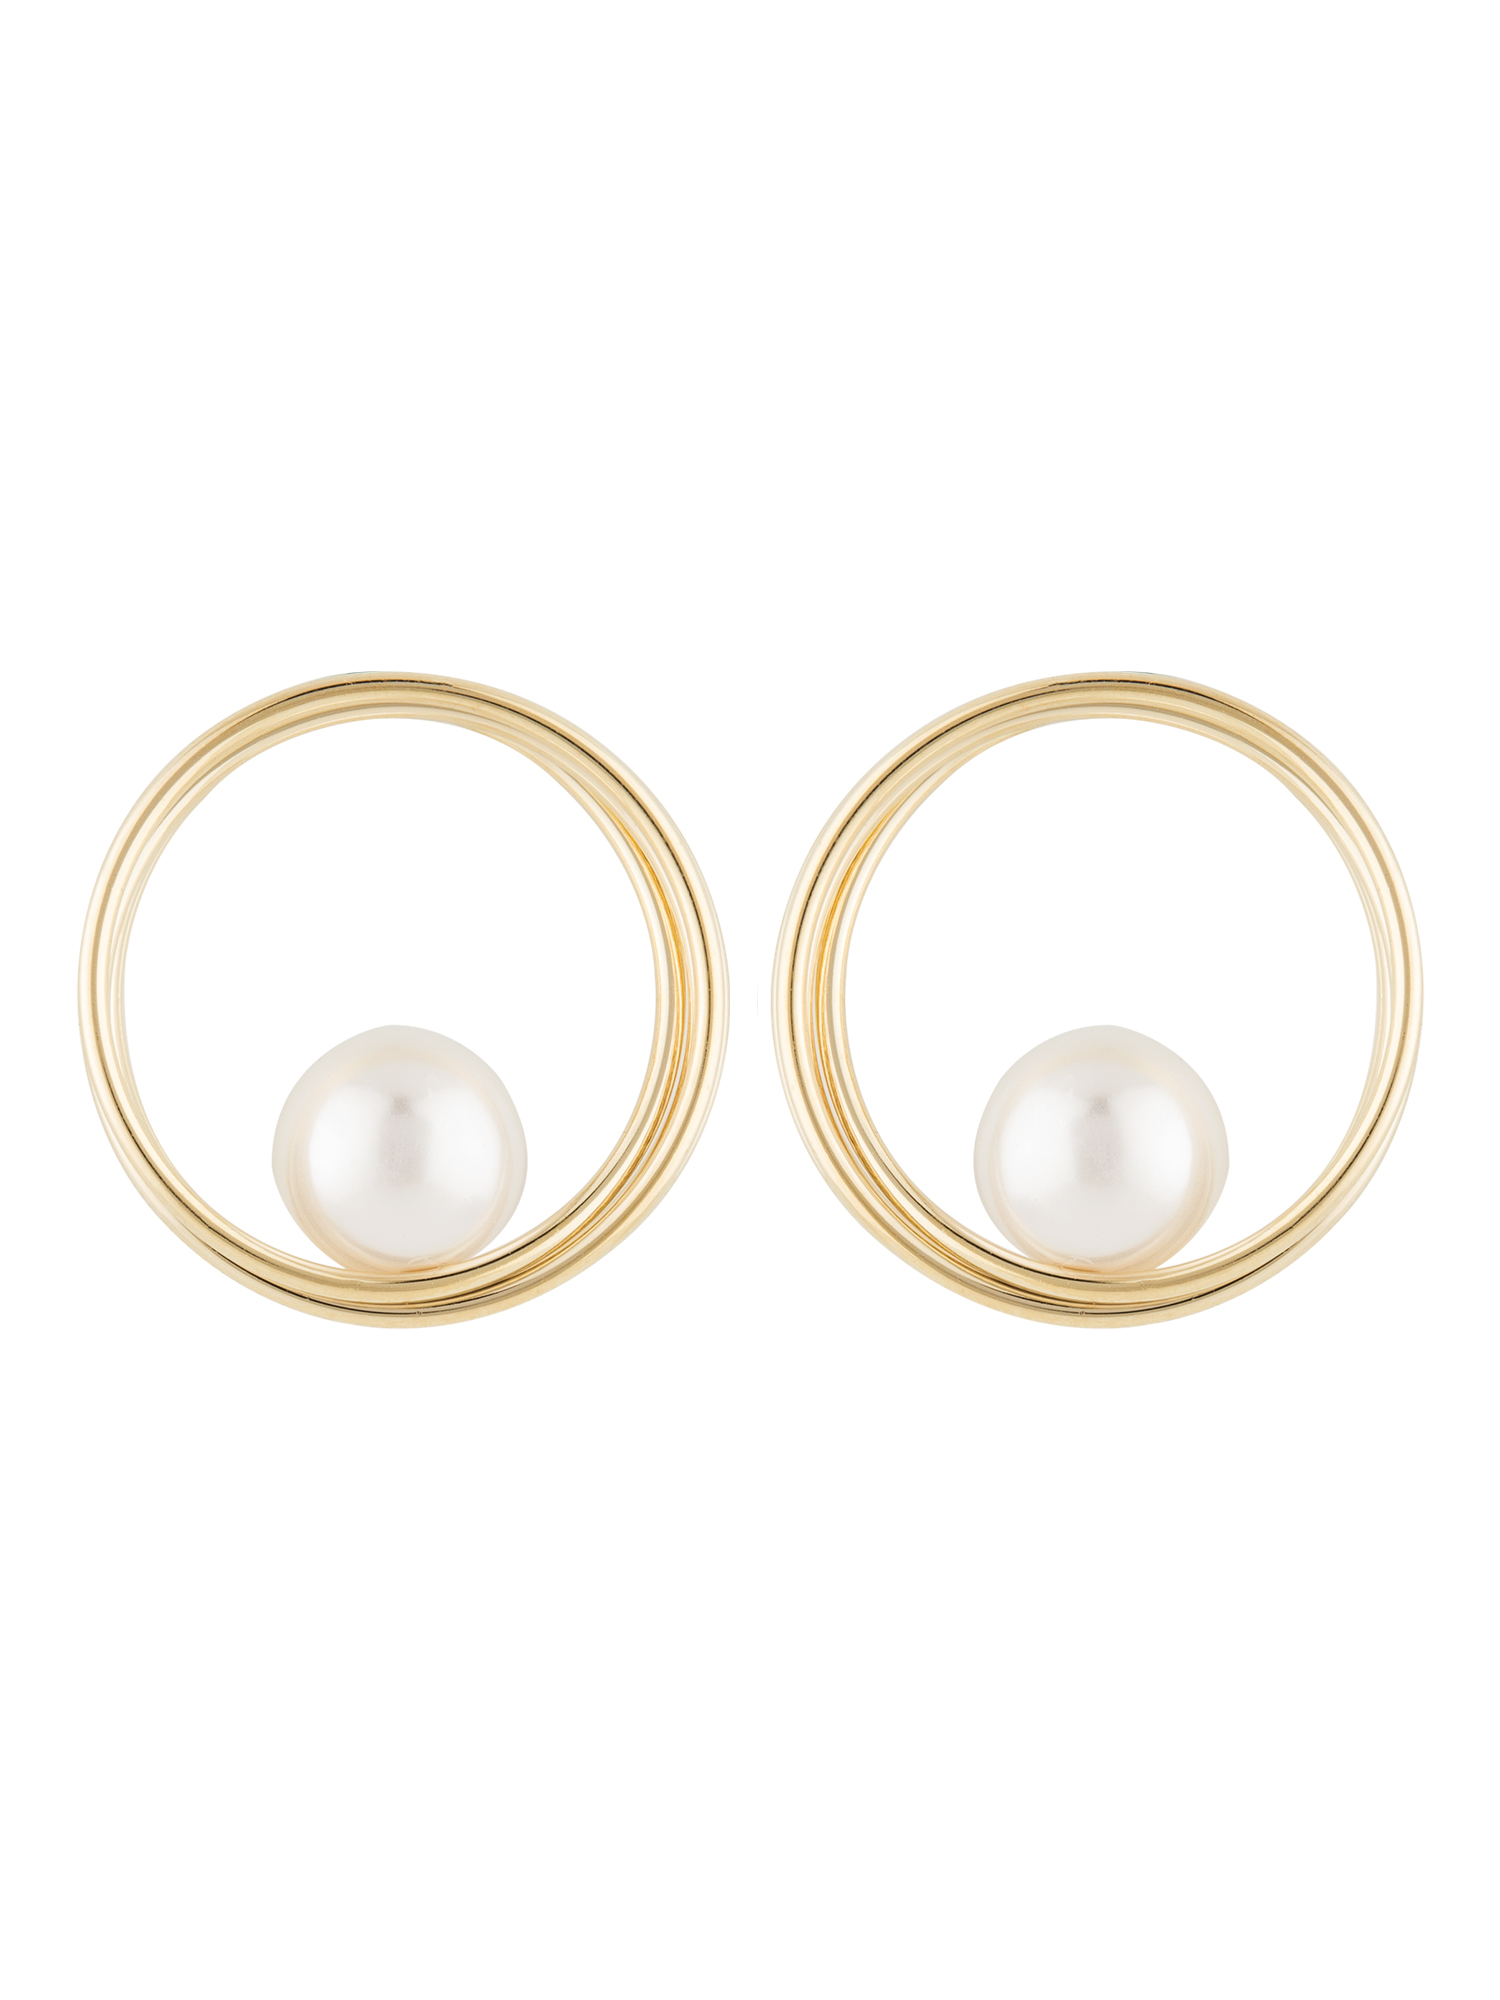 SELF DESIGN WITH WHITE PERAL EMBELLISHED IN ROUND SHAPED GOLD PLATTED STUD  EARRING – E2O Fashion